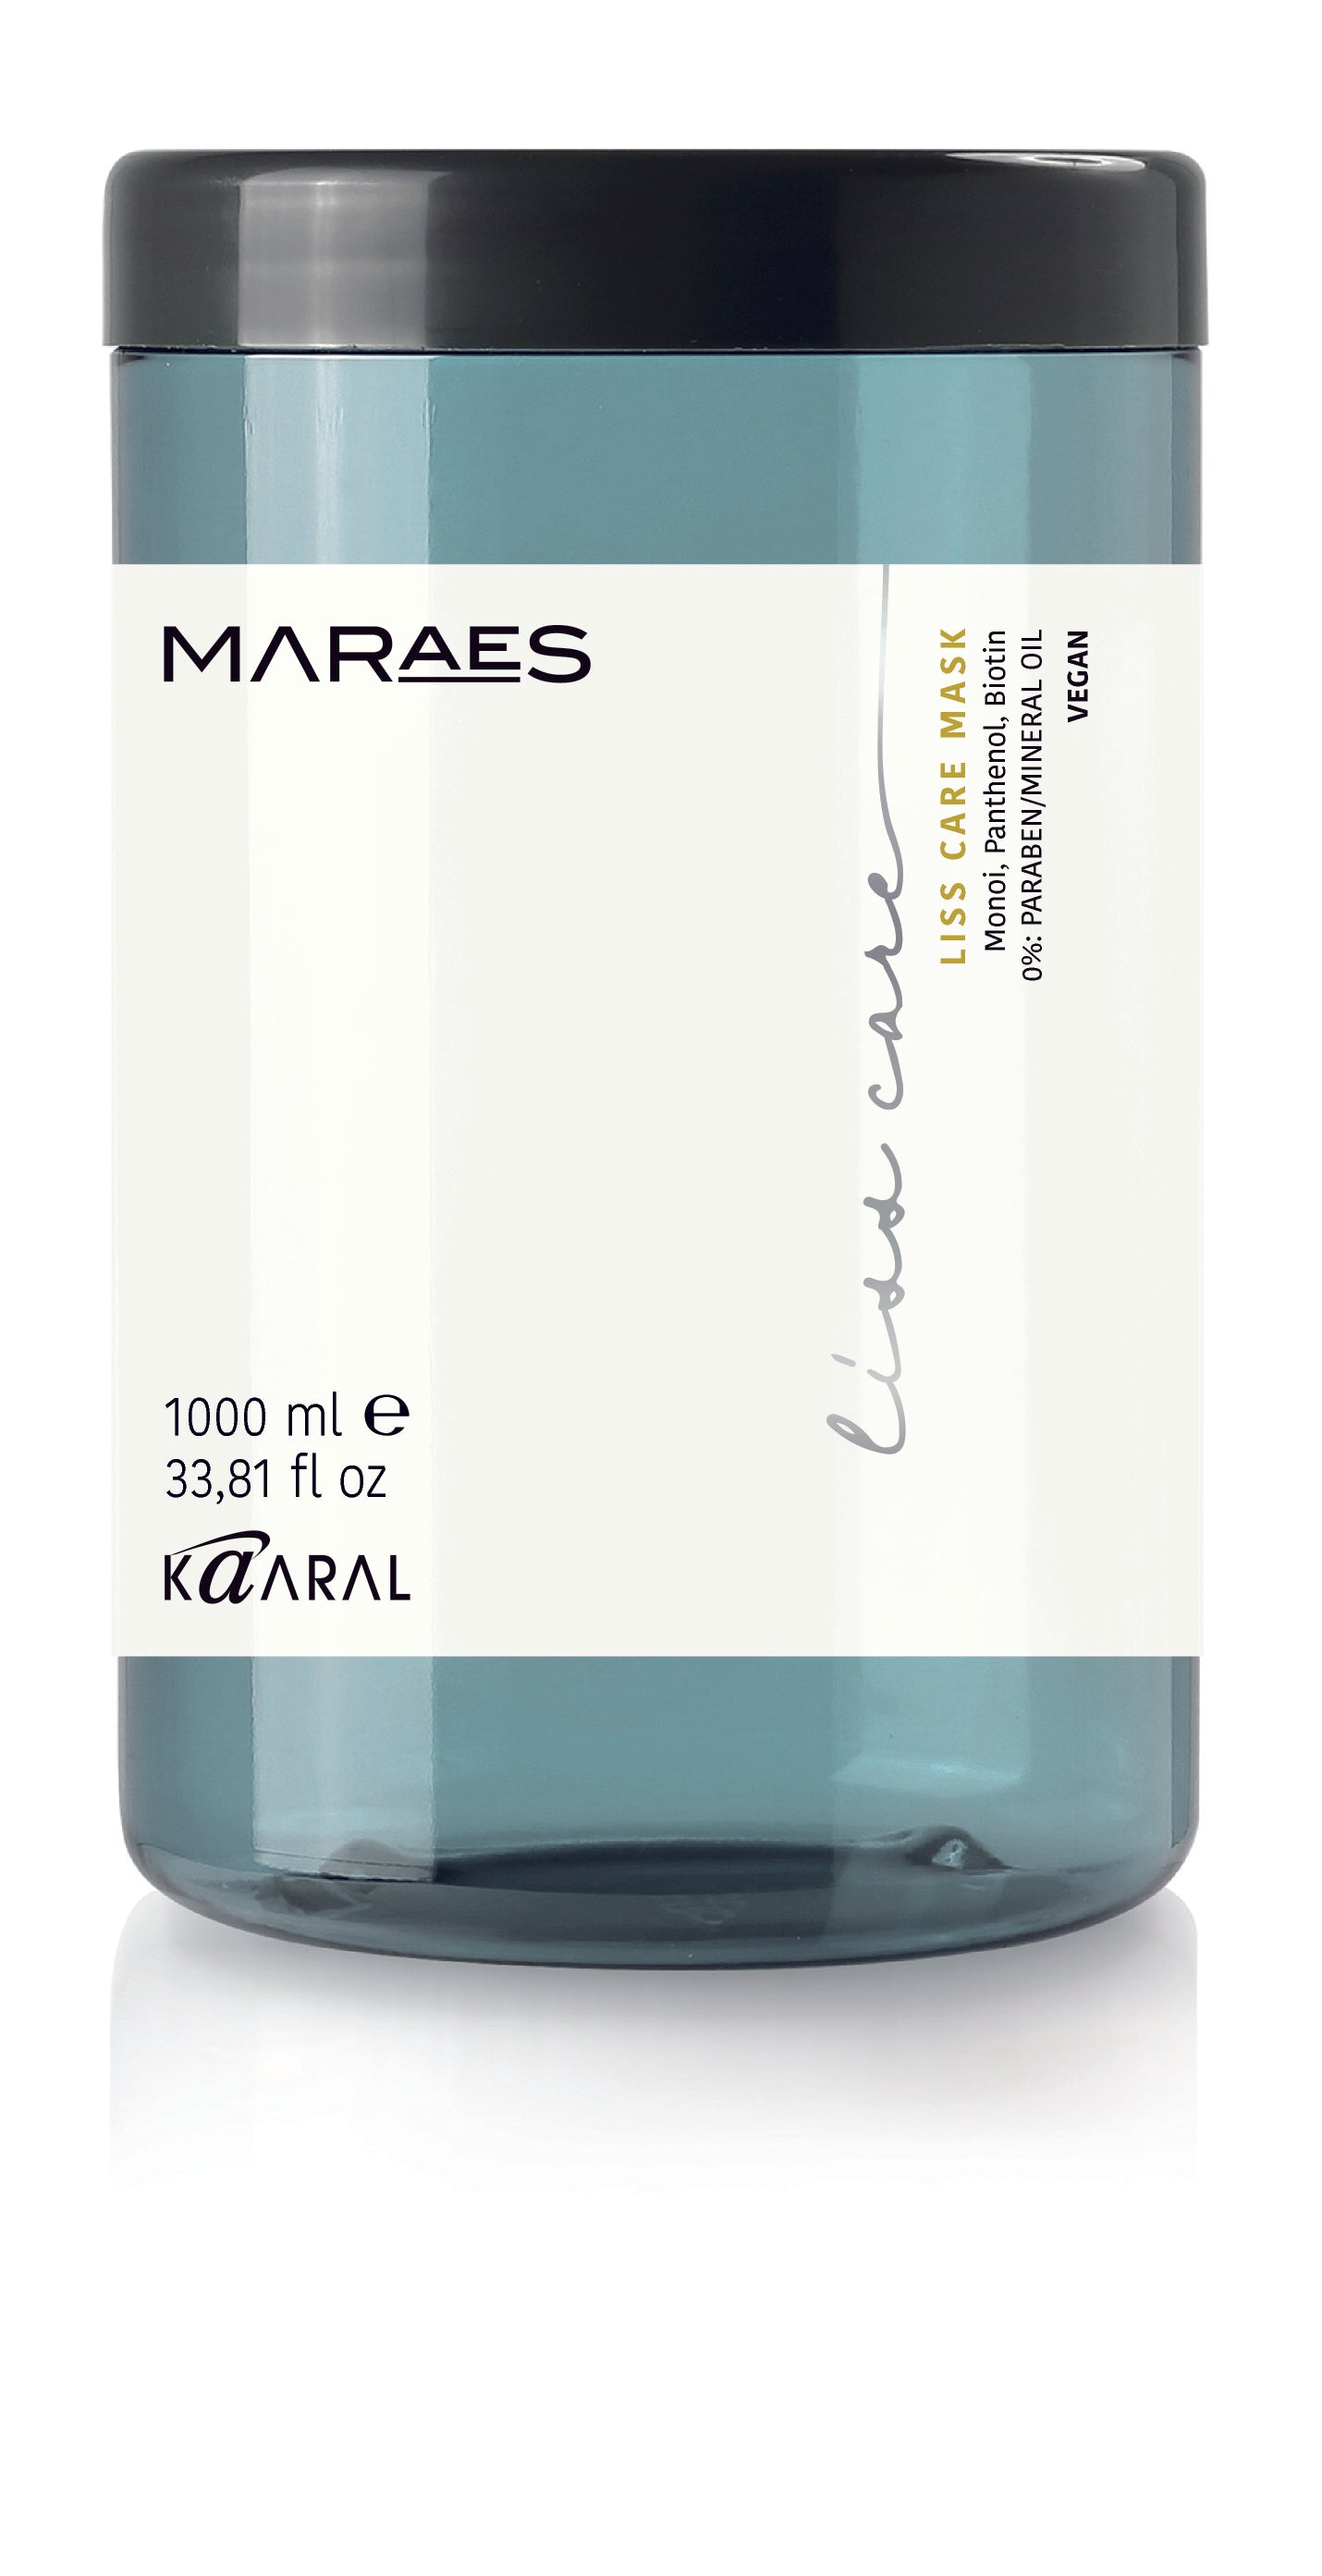 MARAES Liss Care Mask by KAARAL